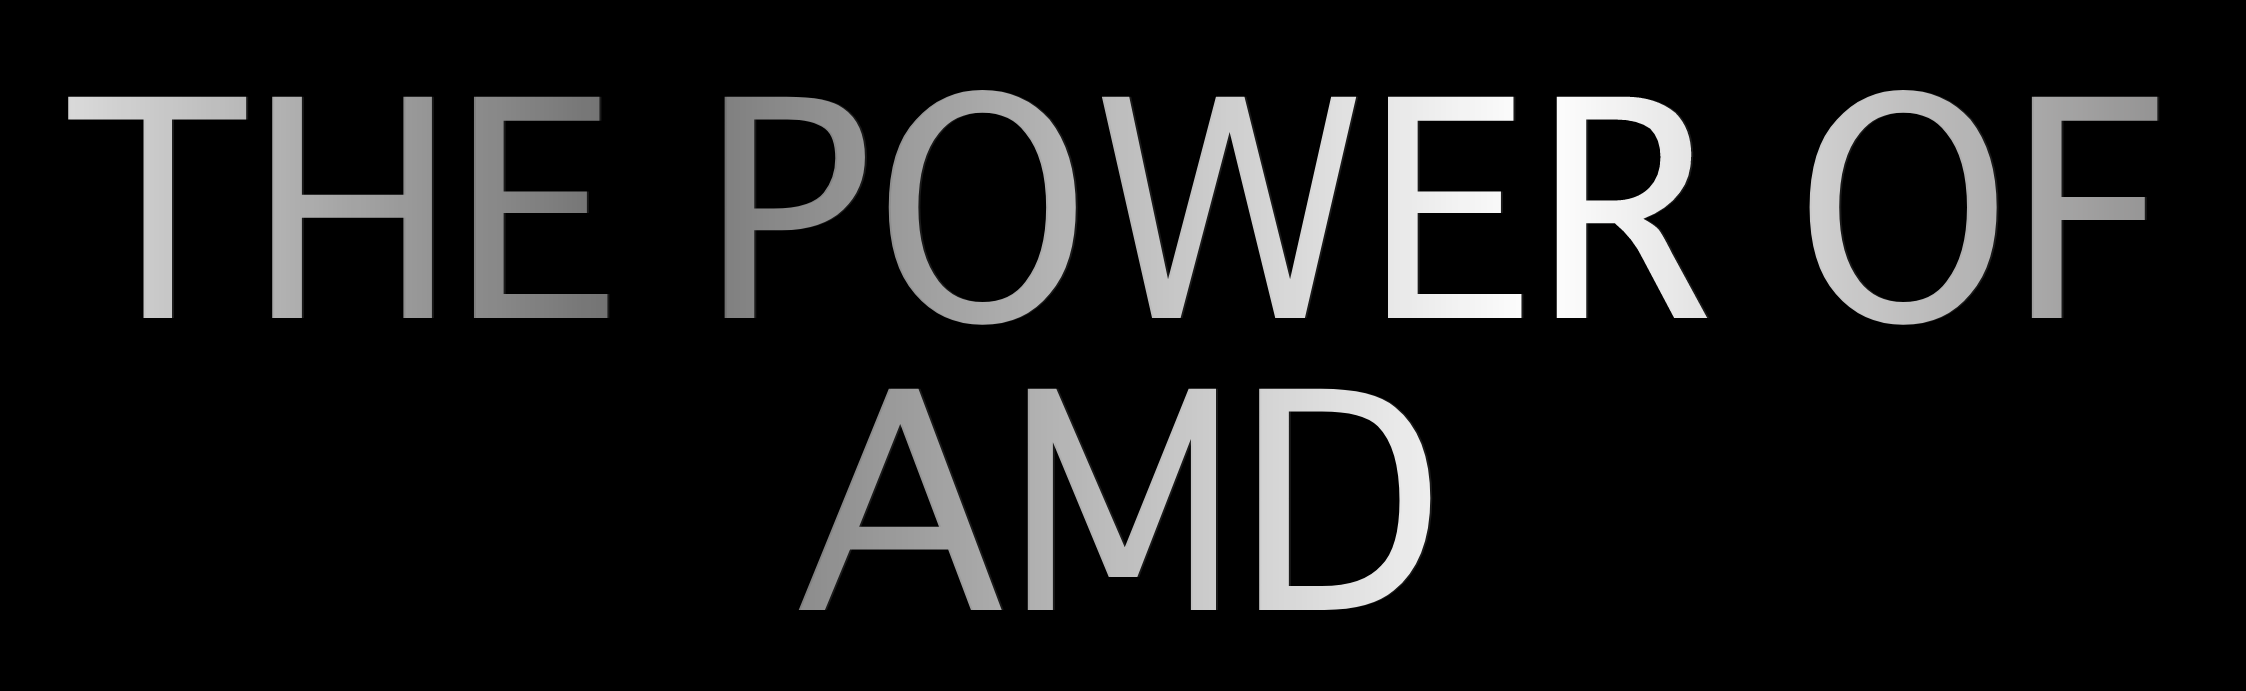 THE POWER OF AMD